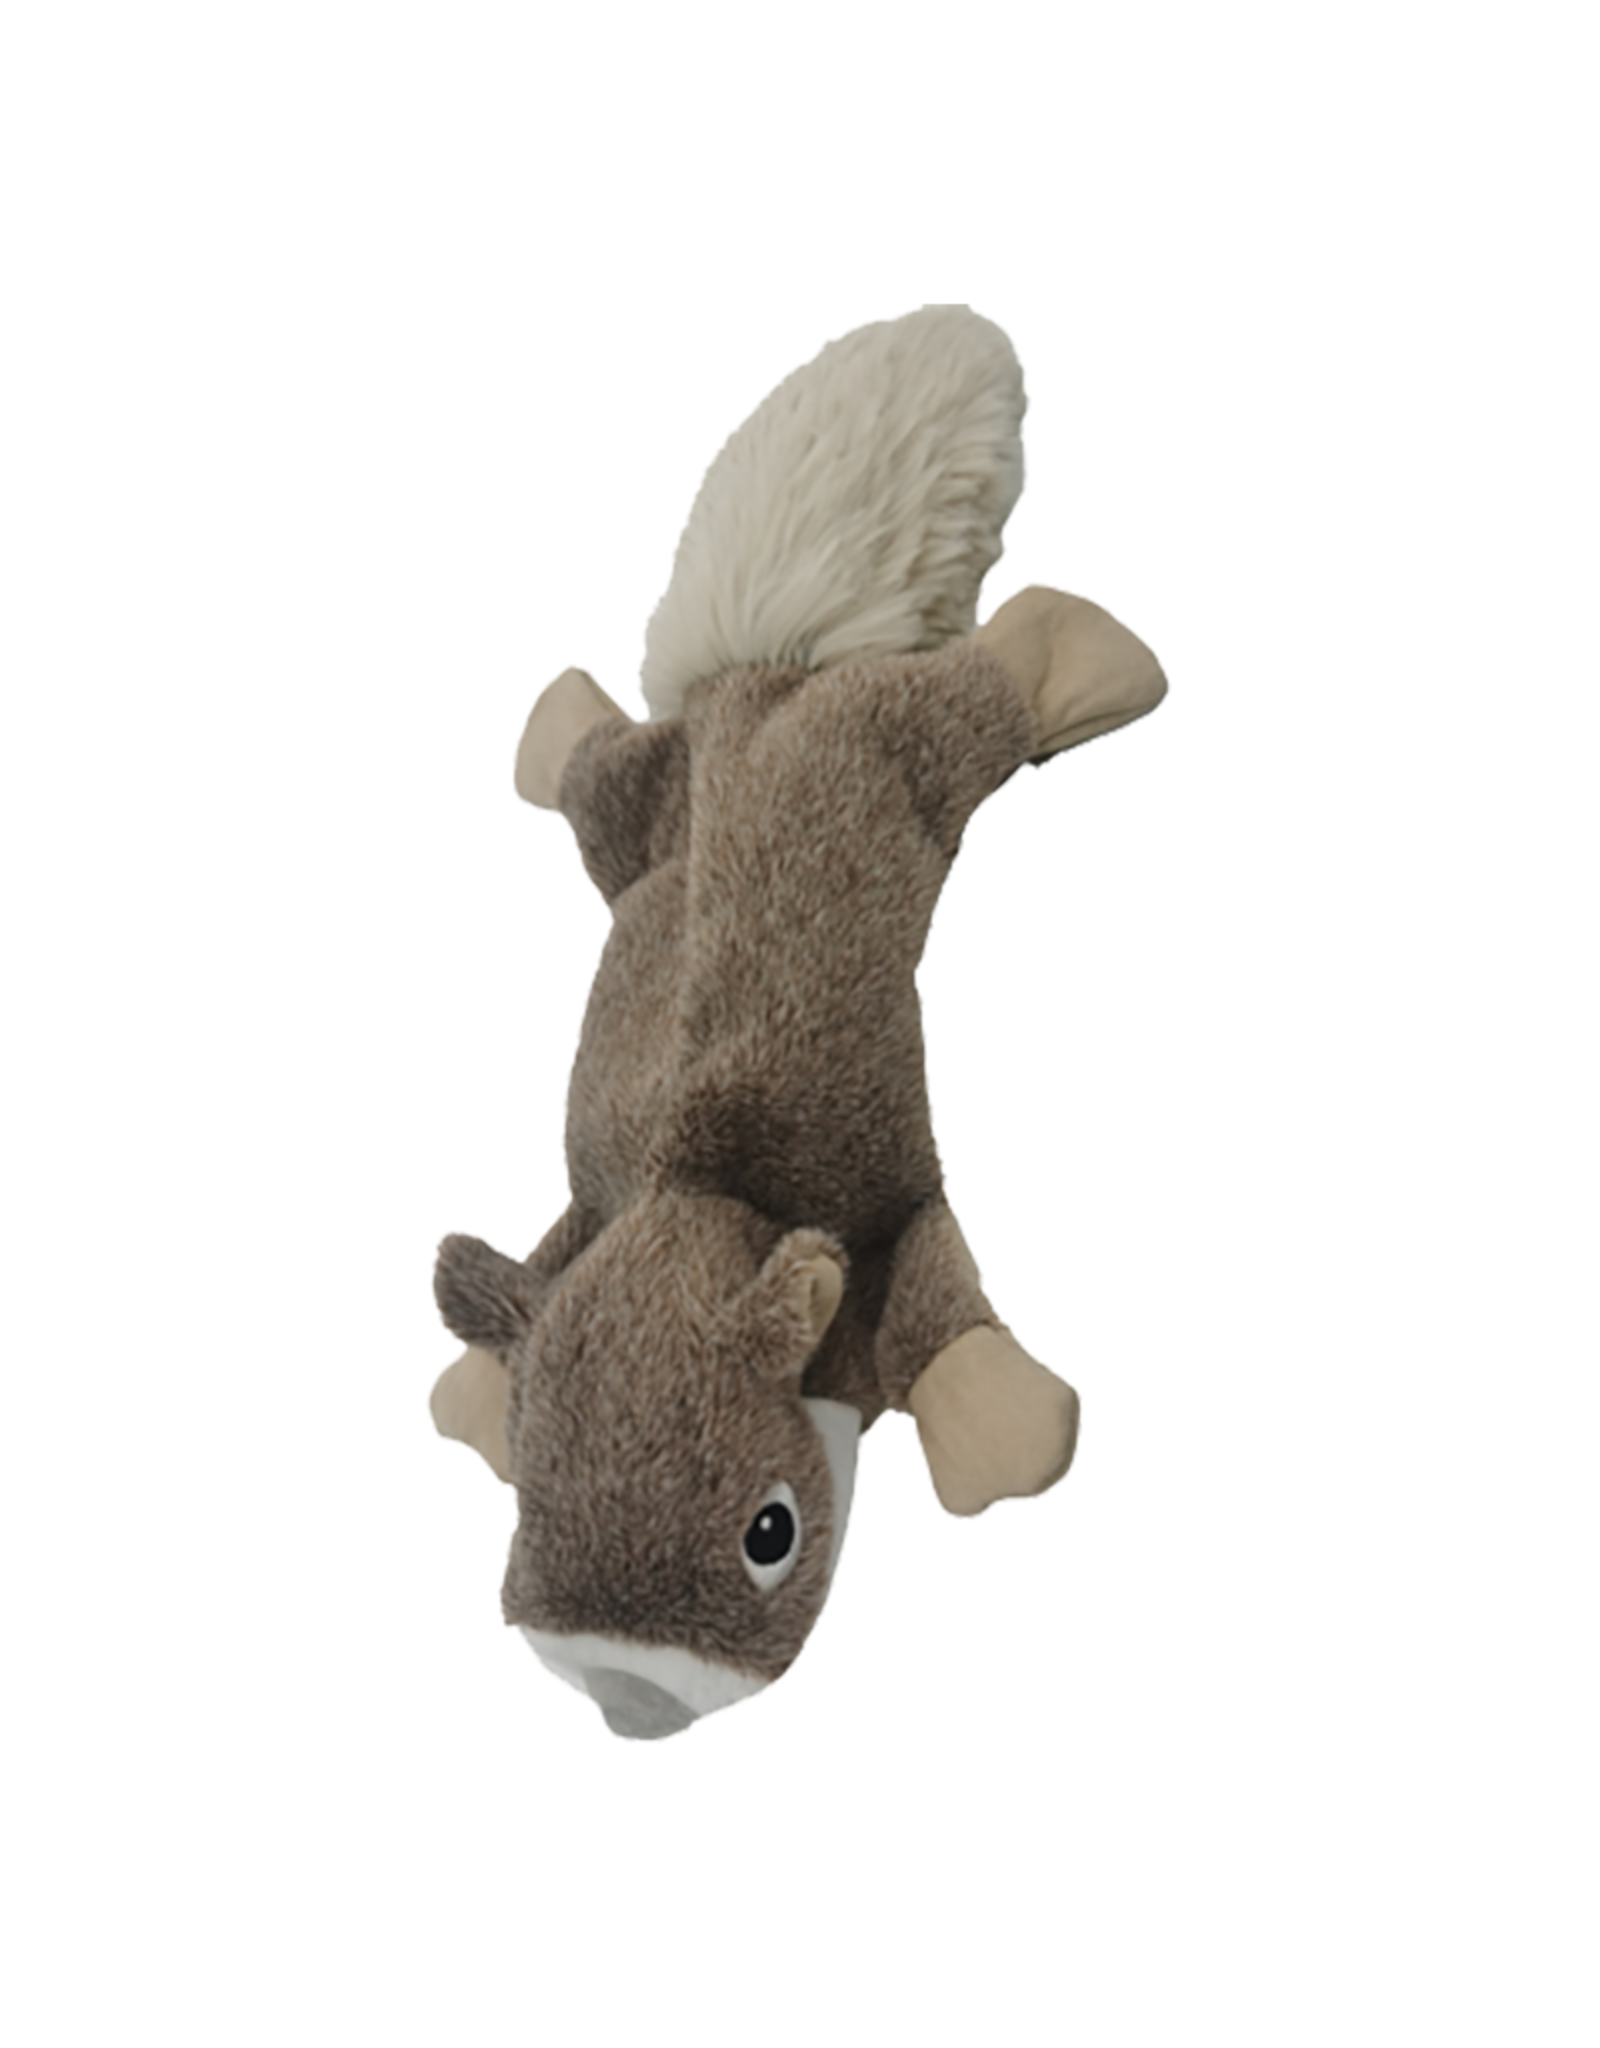 Tall Tails Tall Tails: Stuffless Squeaker Squirrel, 16 inch